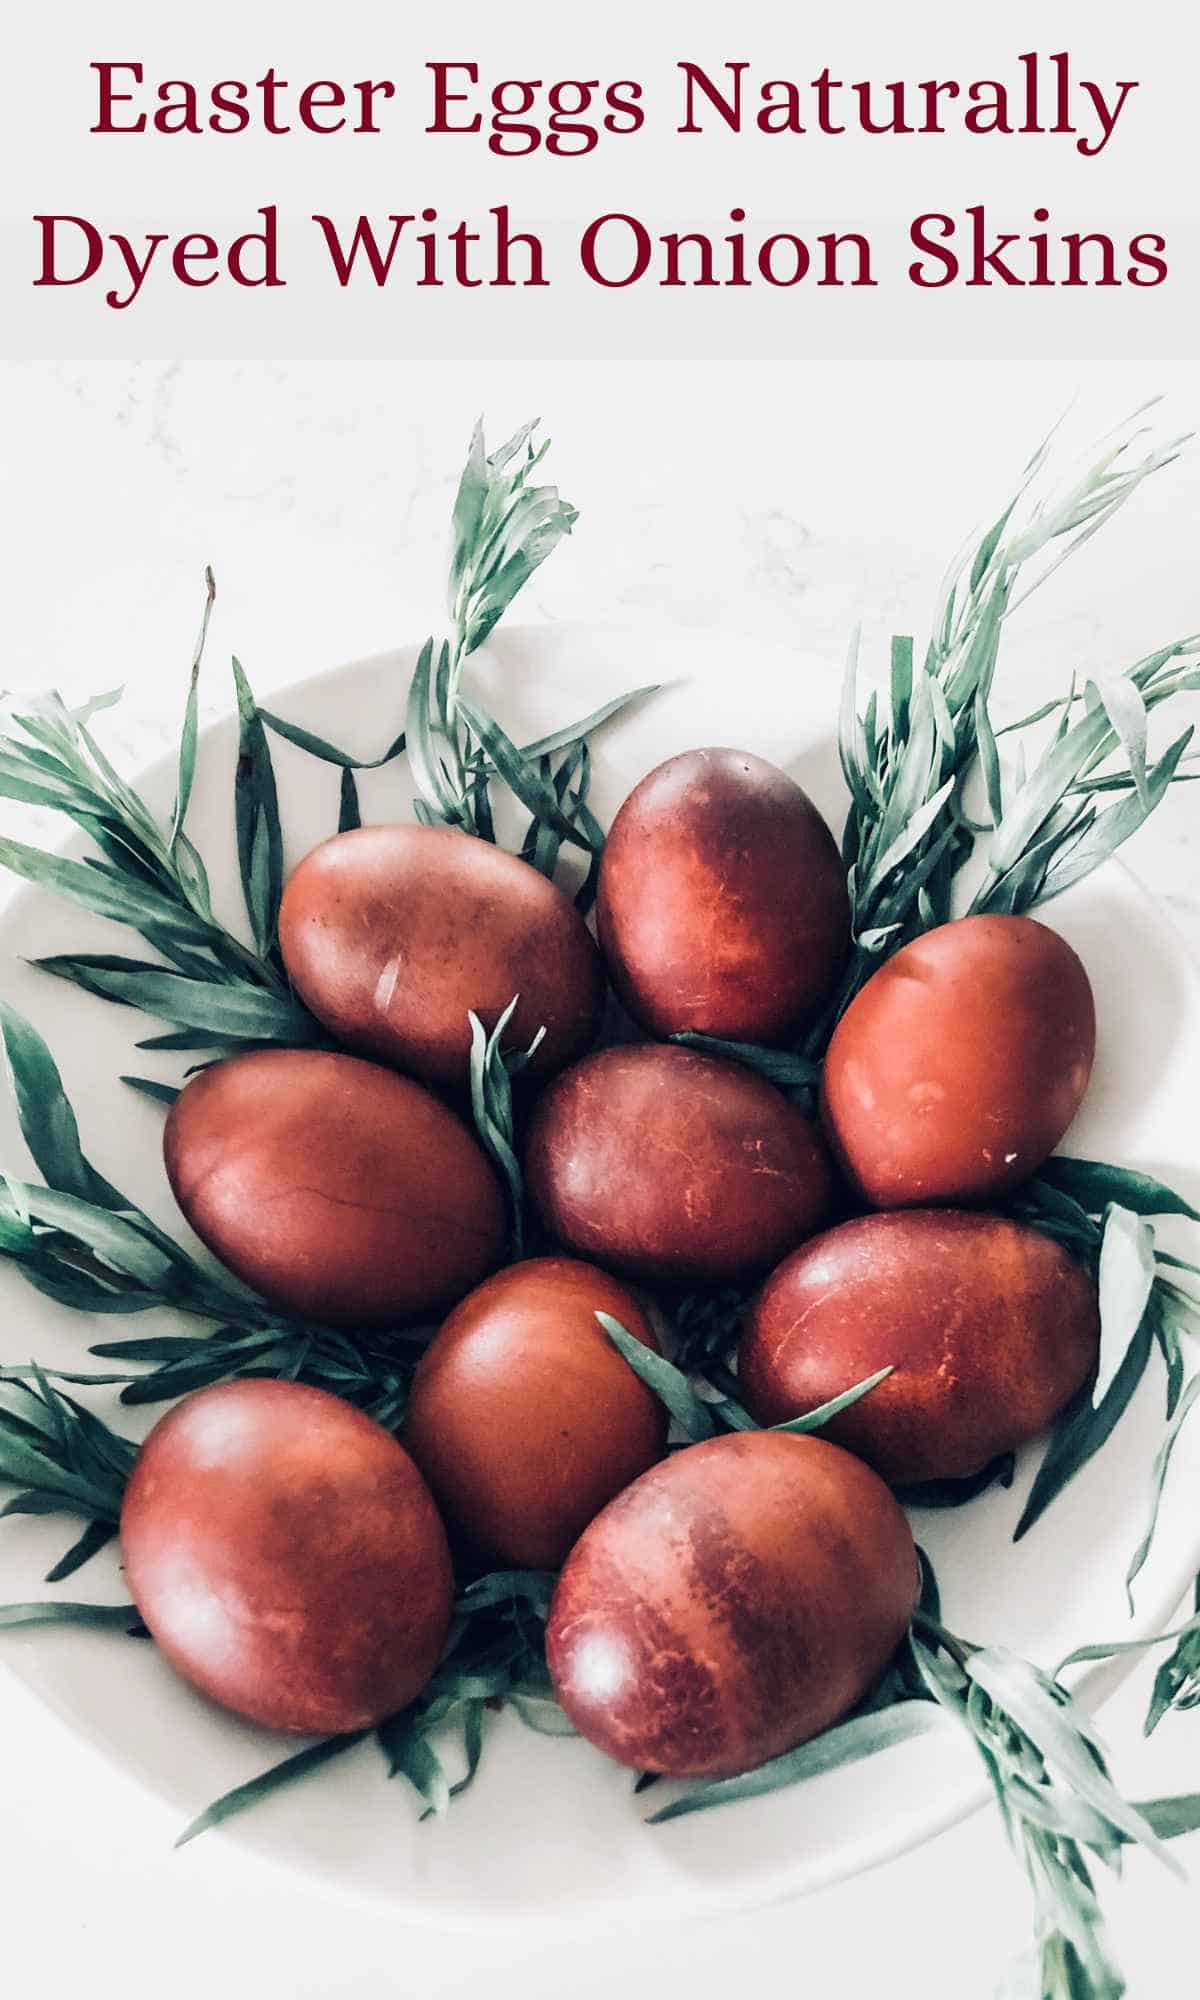 A plate of red Easter eggs naturally dyed with onion skins decorated with tarragon